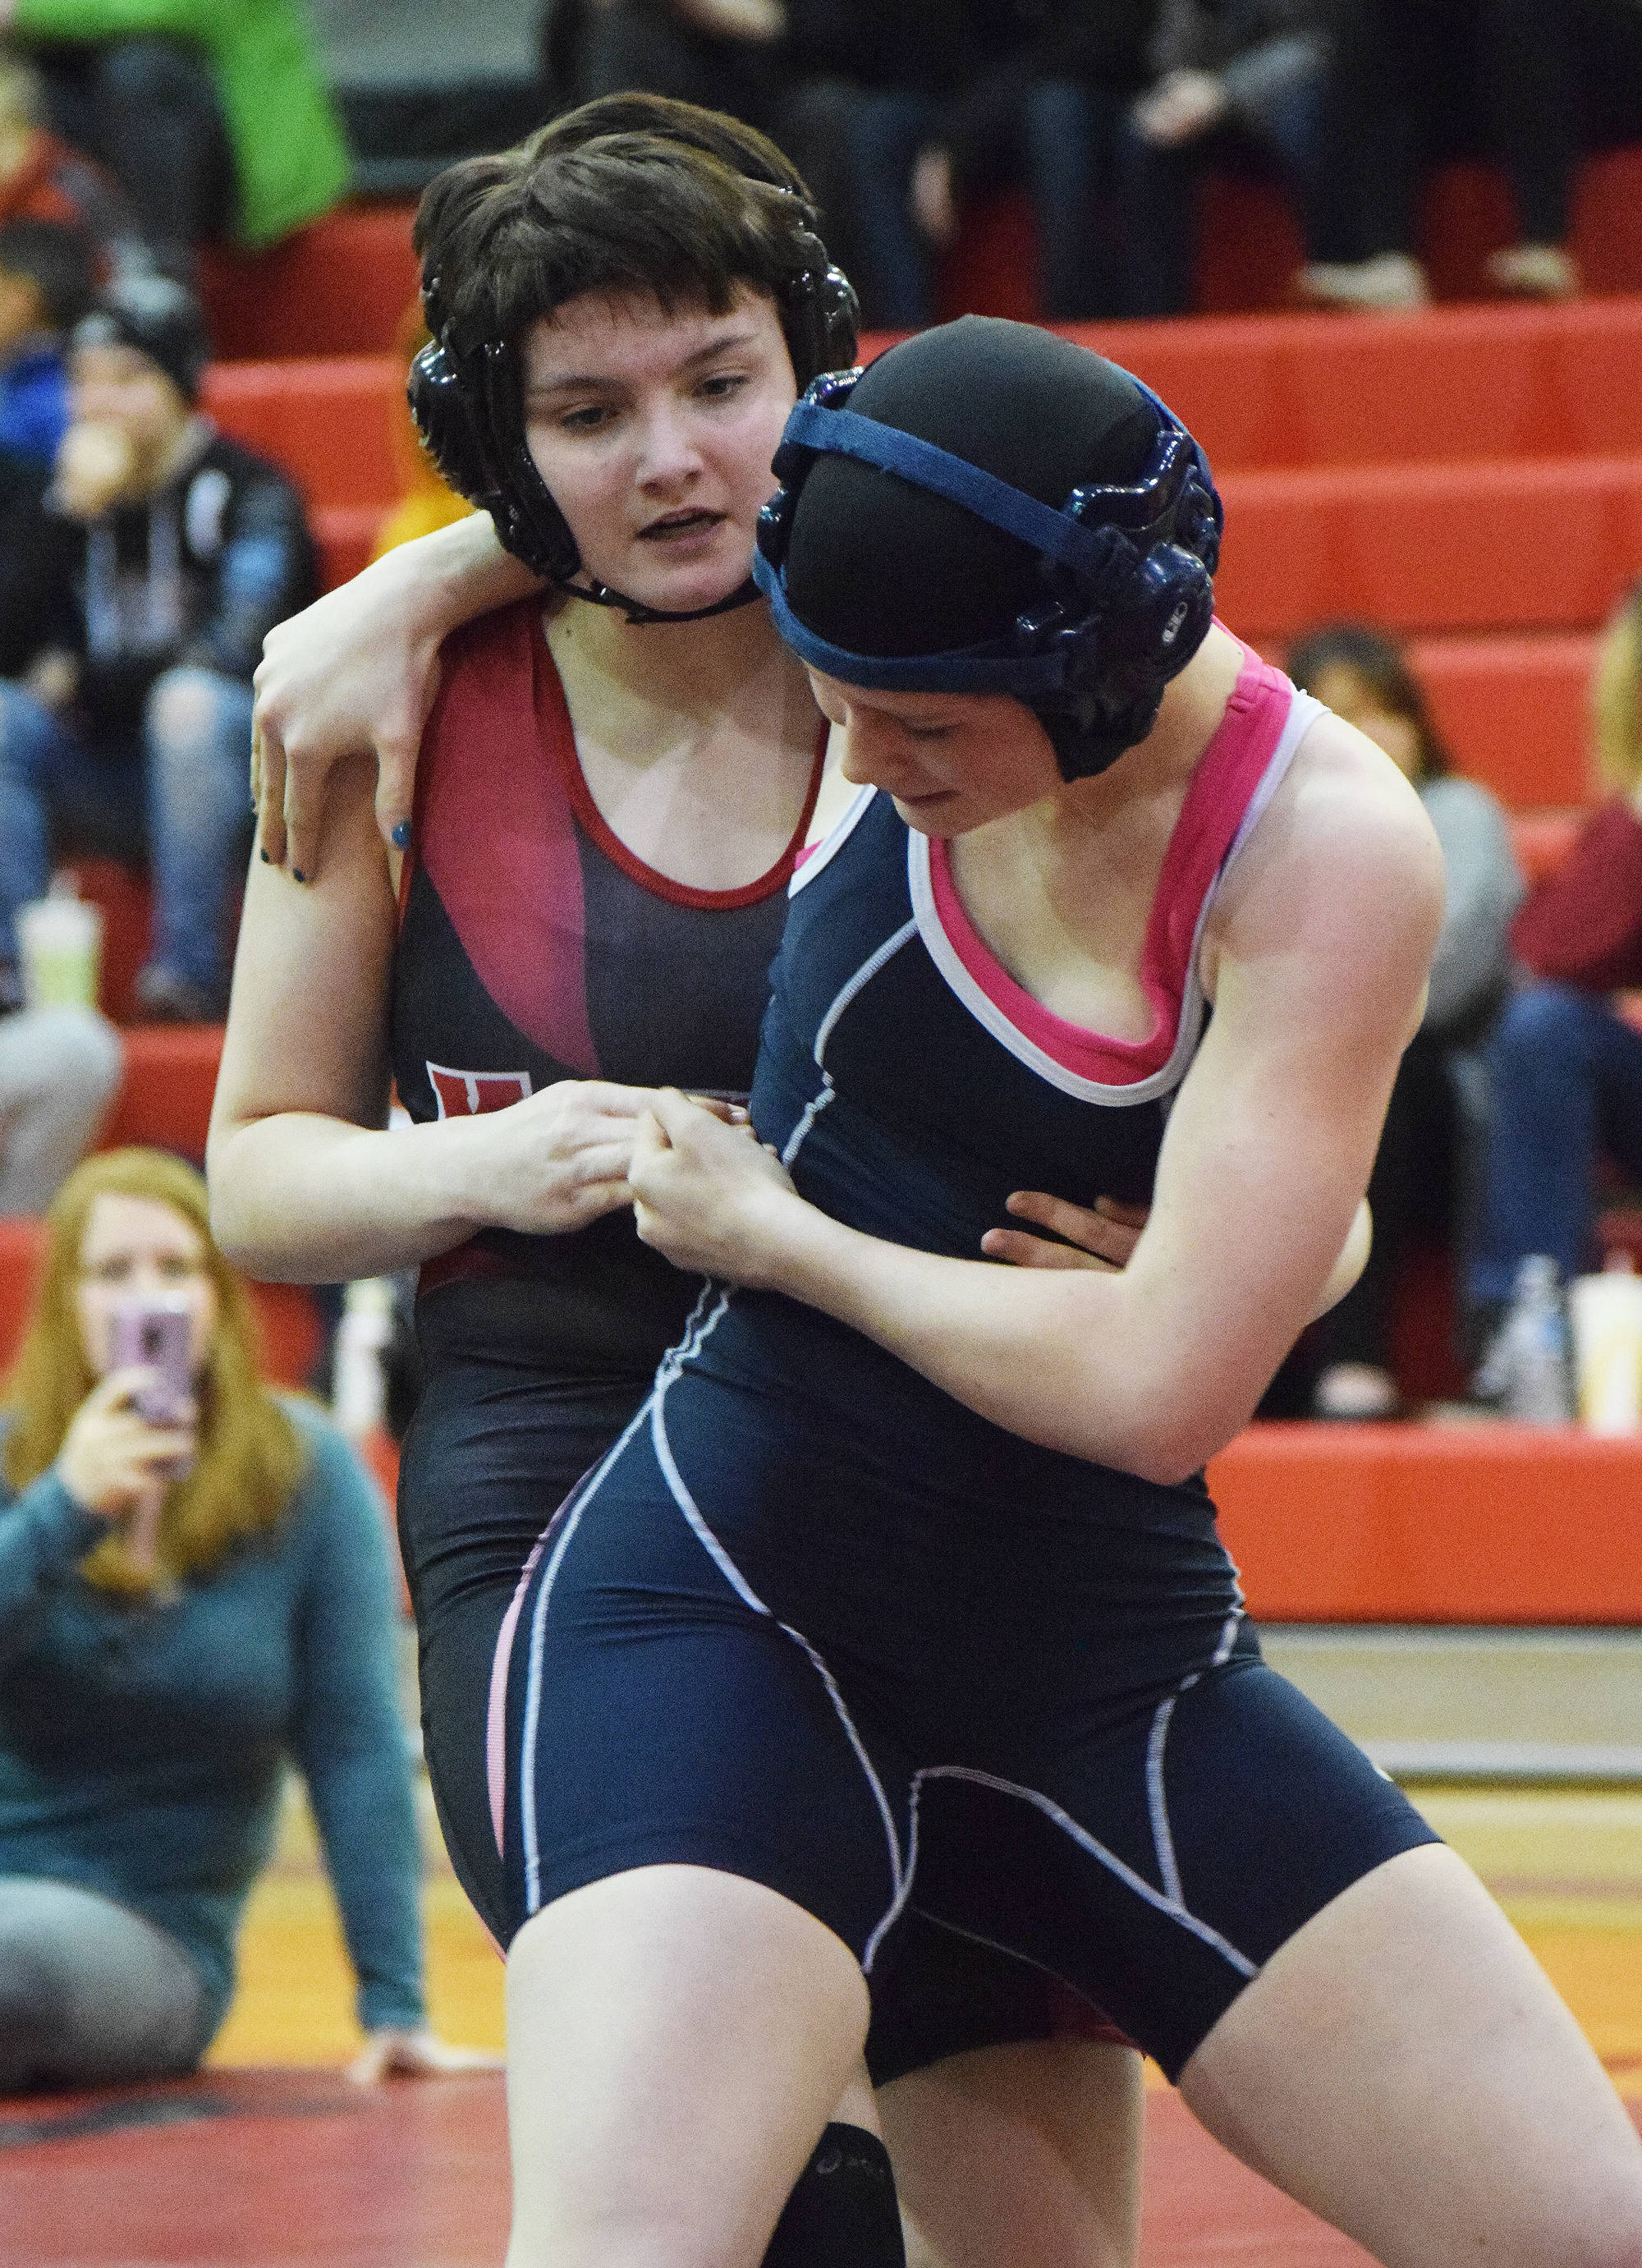 Nikiski’s Destiny Martin (right) attempts to wrestle Kenai’s Olivia Easley to the mat Tuesday night in a dual meet at Kenai Central High School. (Photo by Joey Klecka/Peninsula Clarion)